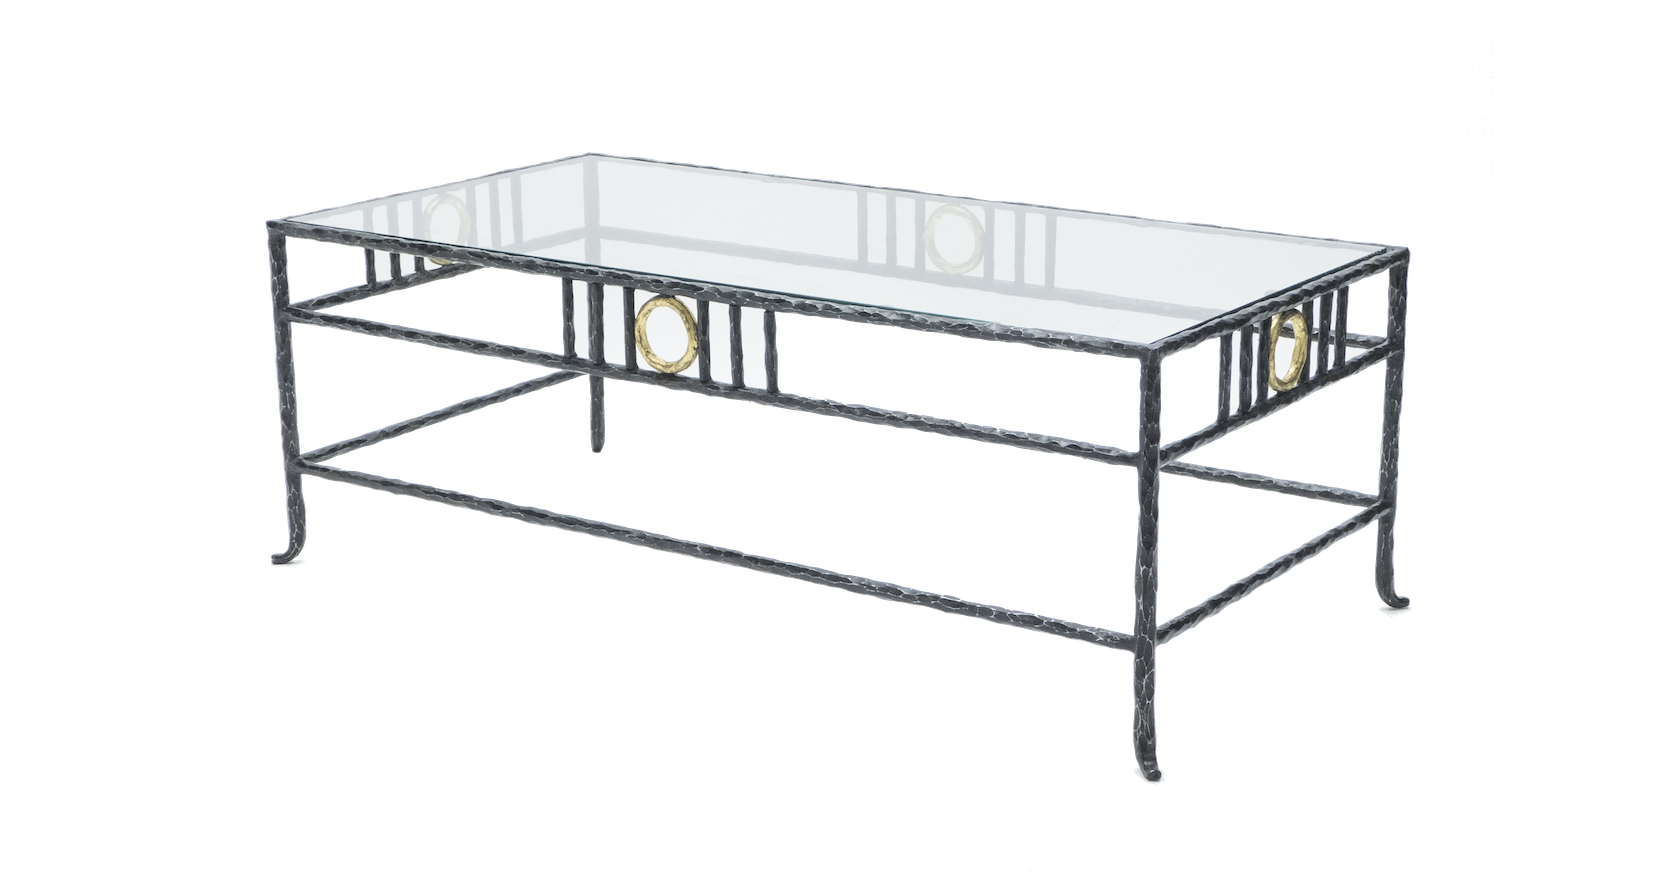 Garouste Bonetti, rectangular low table, legs in black wrought iron decorated by 4 golden circles, glass top